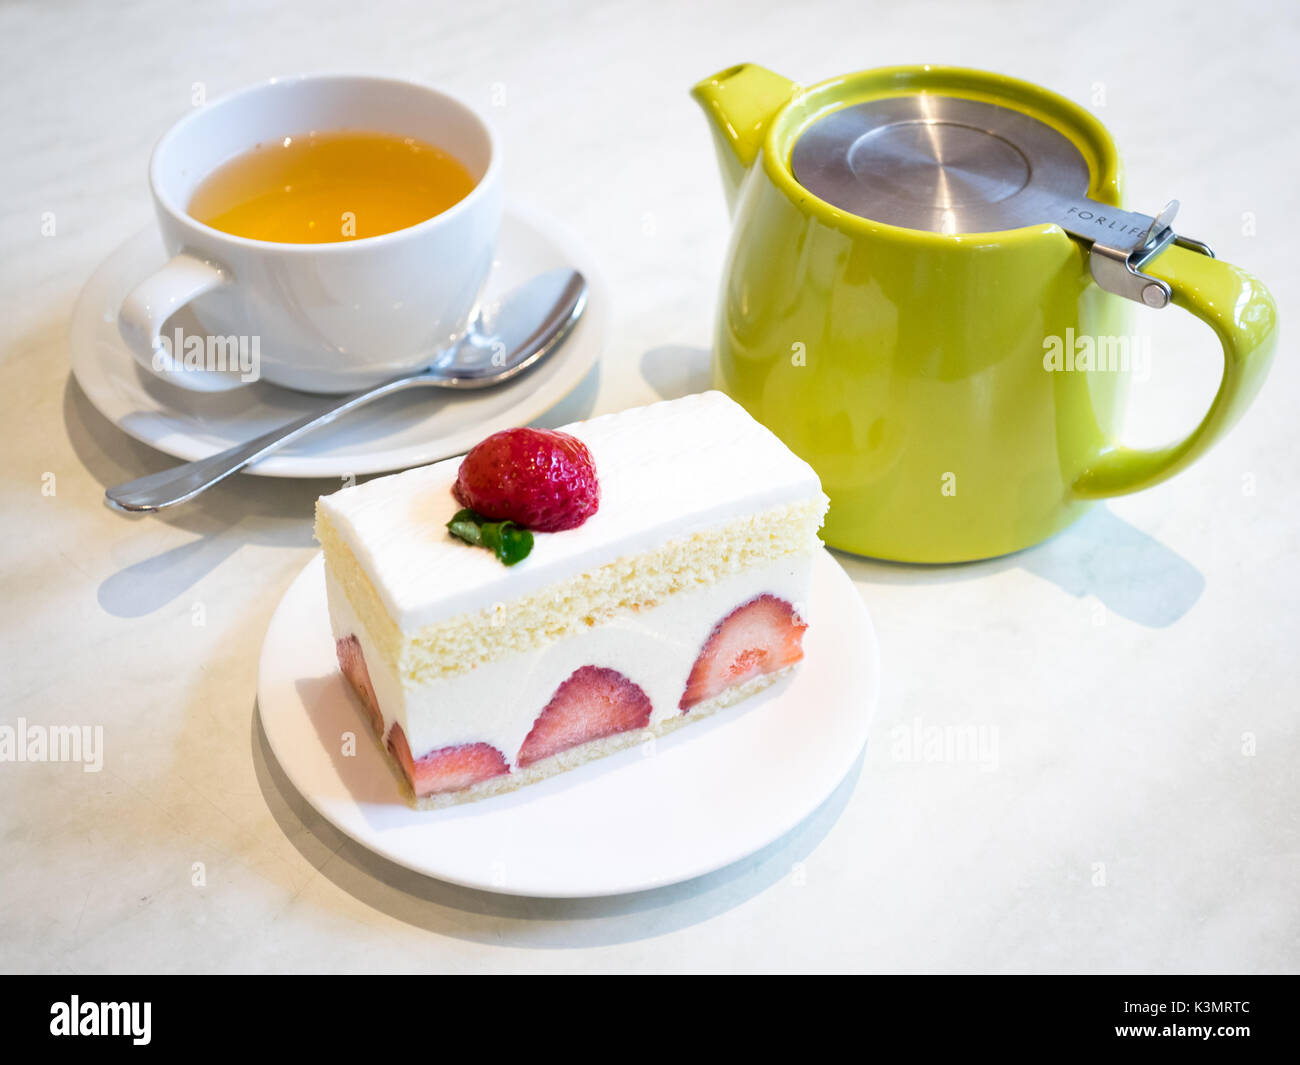 A slice of delicious strawberry shortcake, a popular dessert, and a cup of ginger tea. Stock Photo